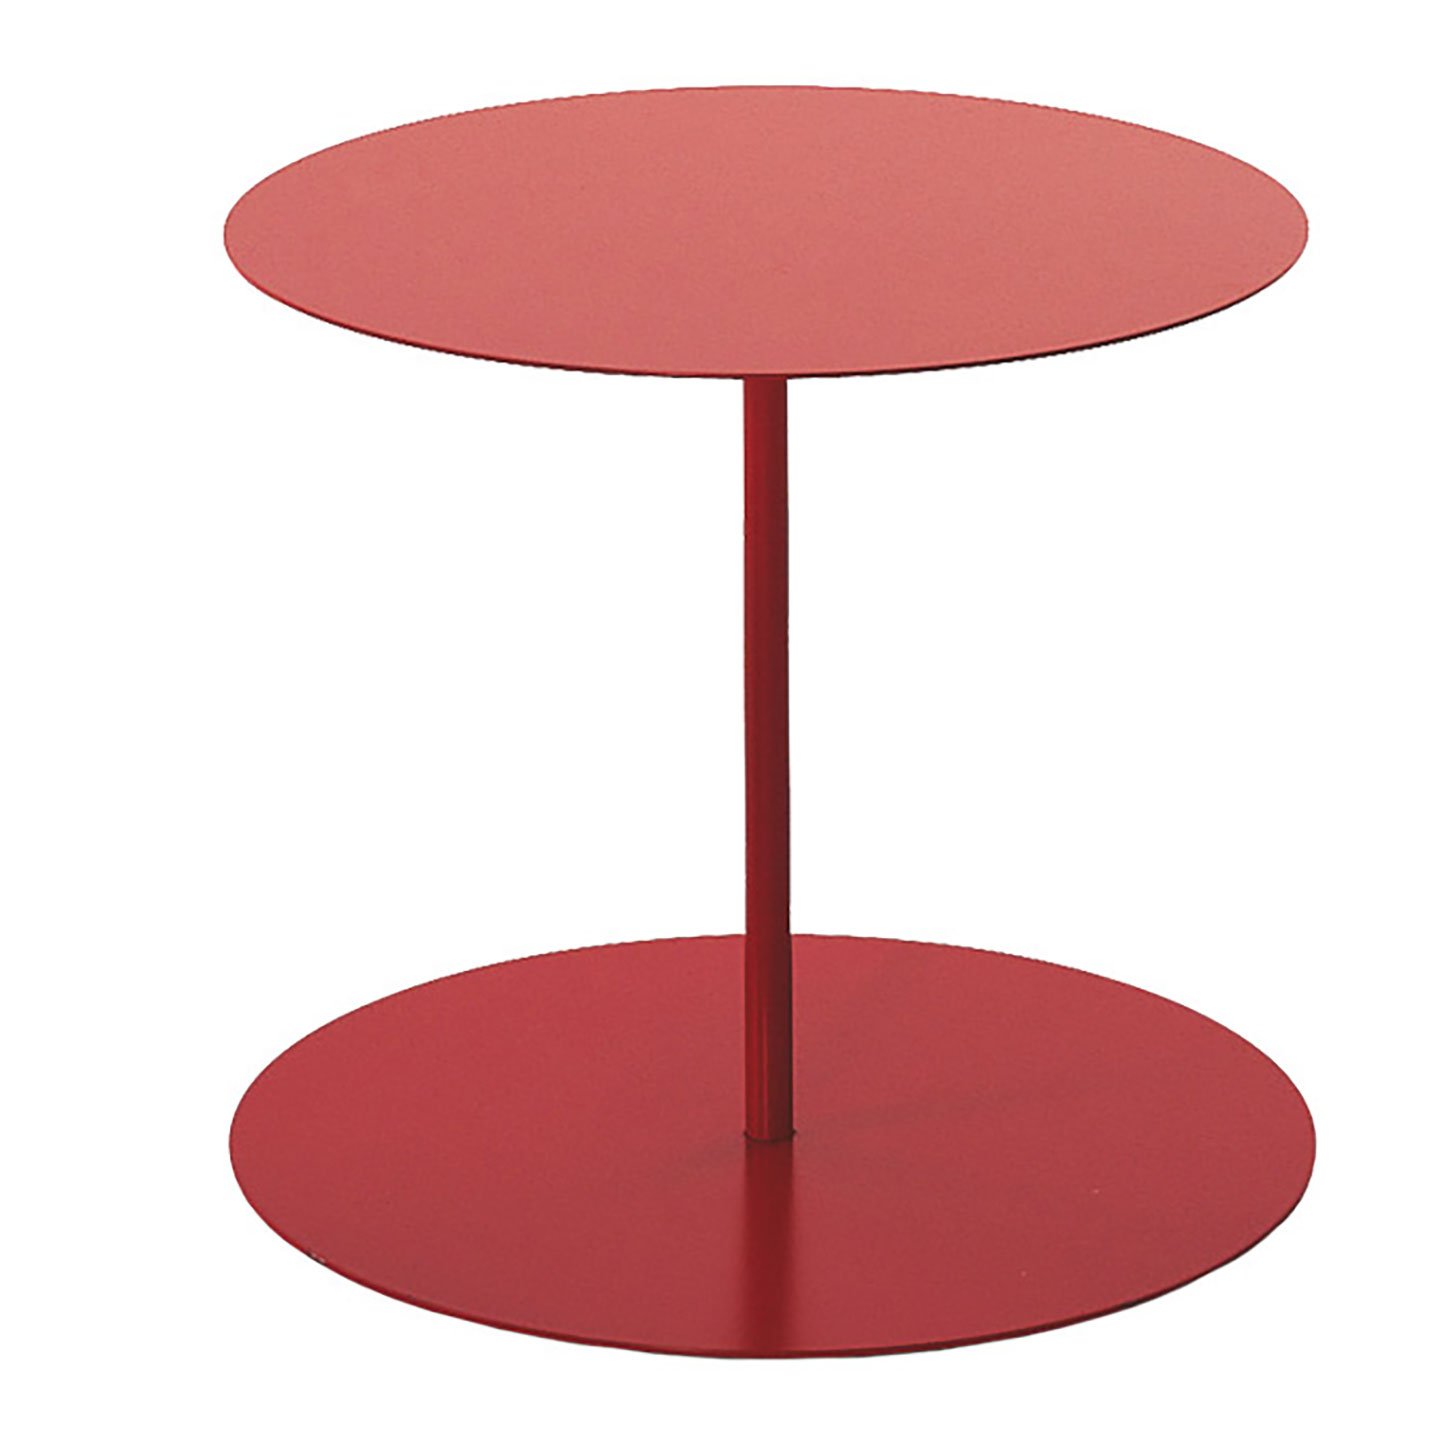 Haworth gong table with circular base and top in red